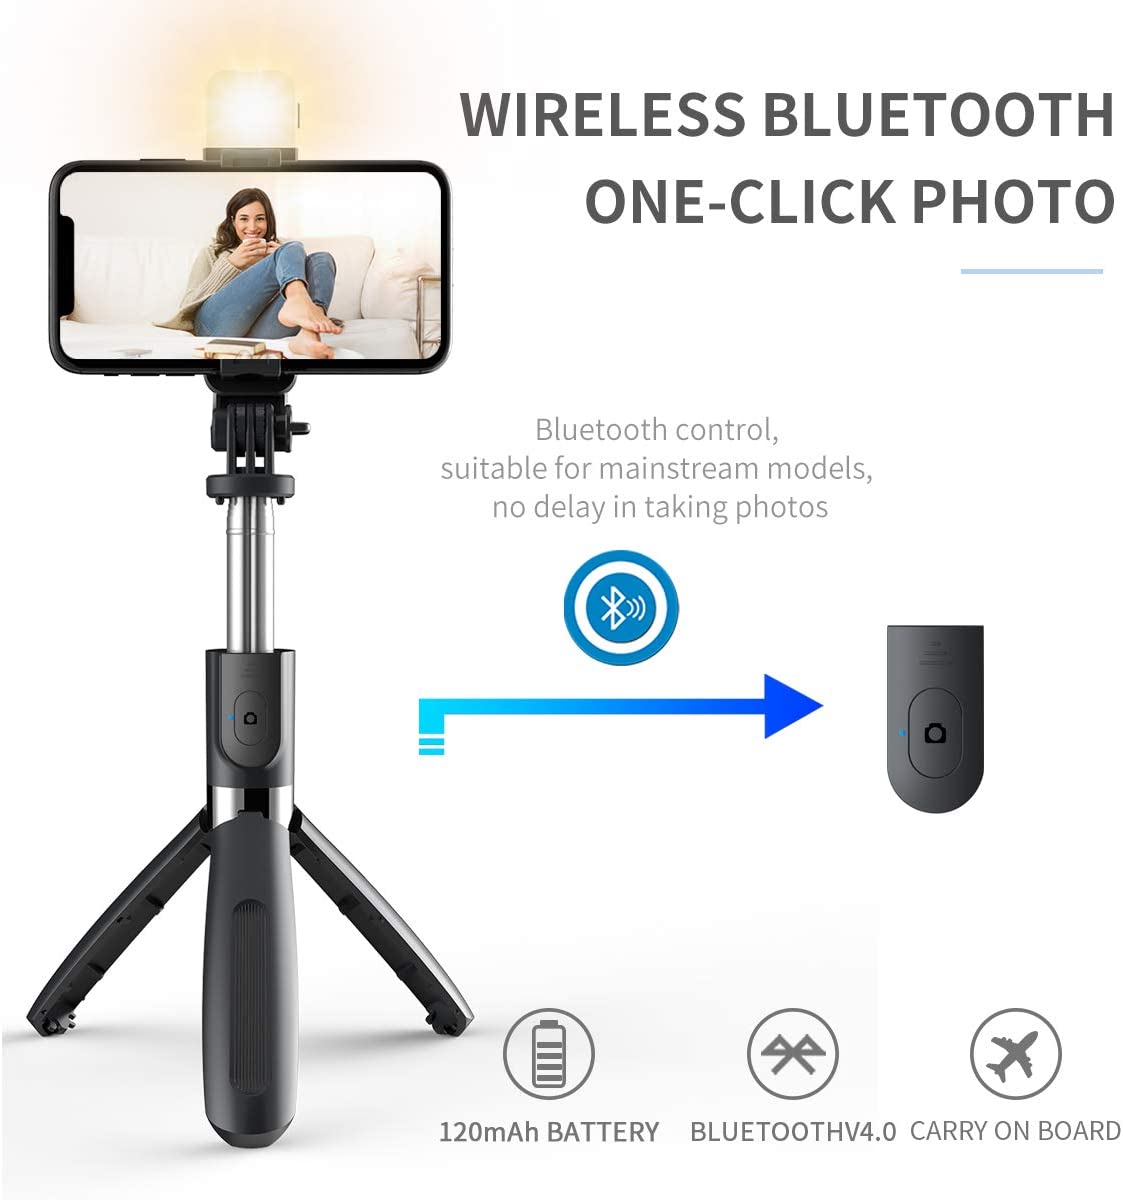 4-IN-1 Multifunctional Selfie Stick With Tripod Stand & LED Fill Light With Wireless Bluetooth Remote (Black)